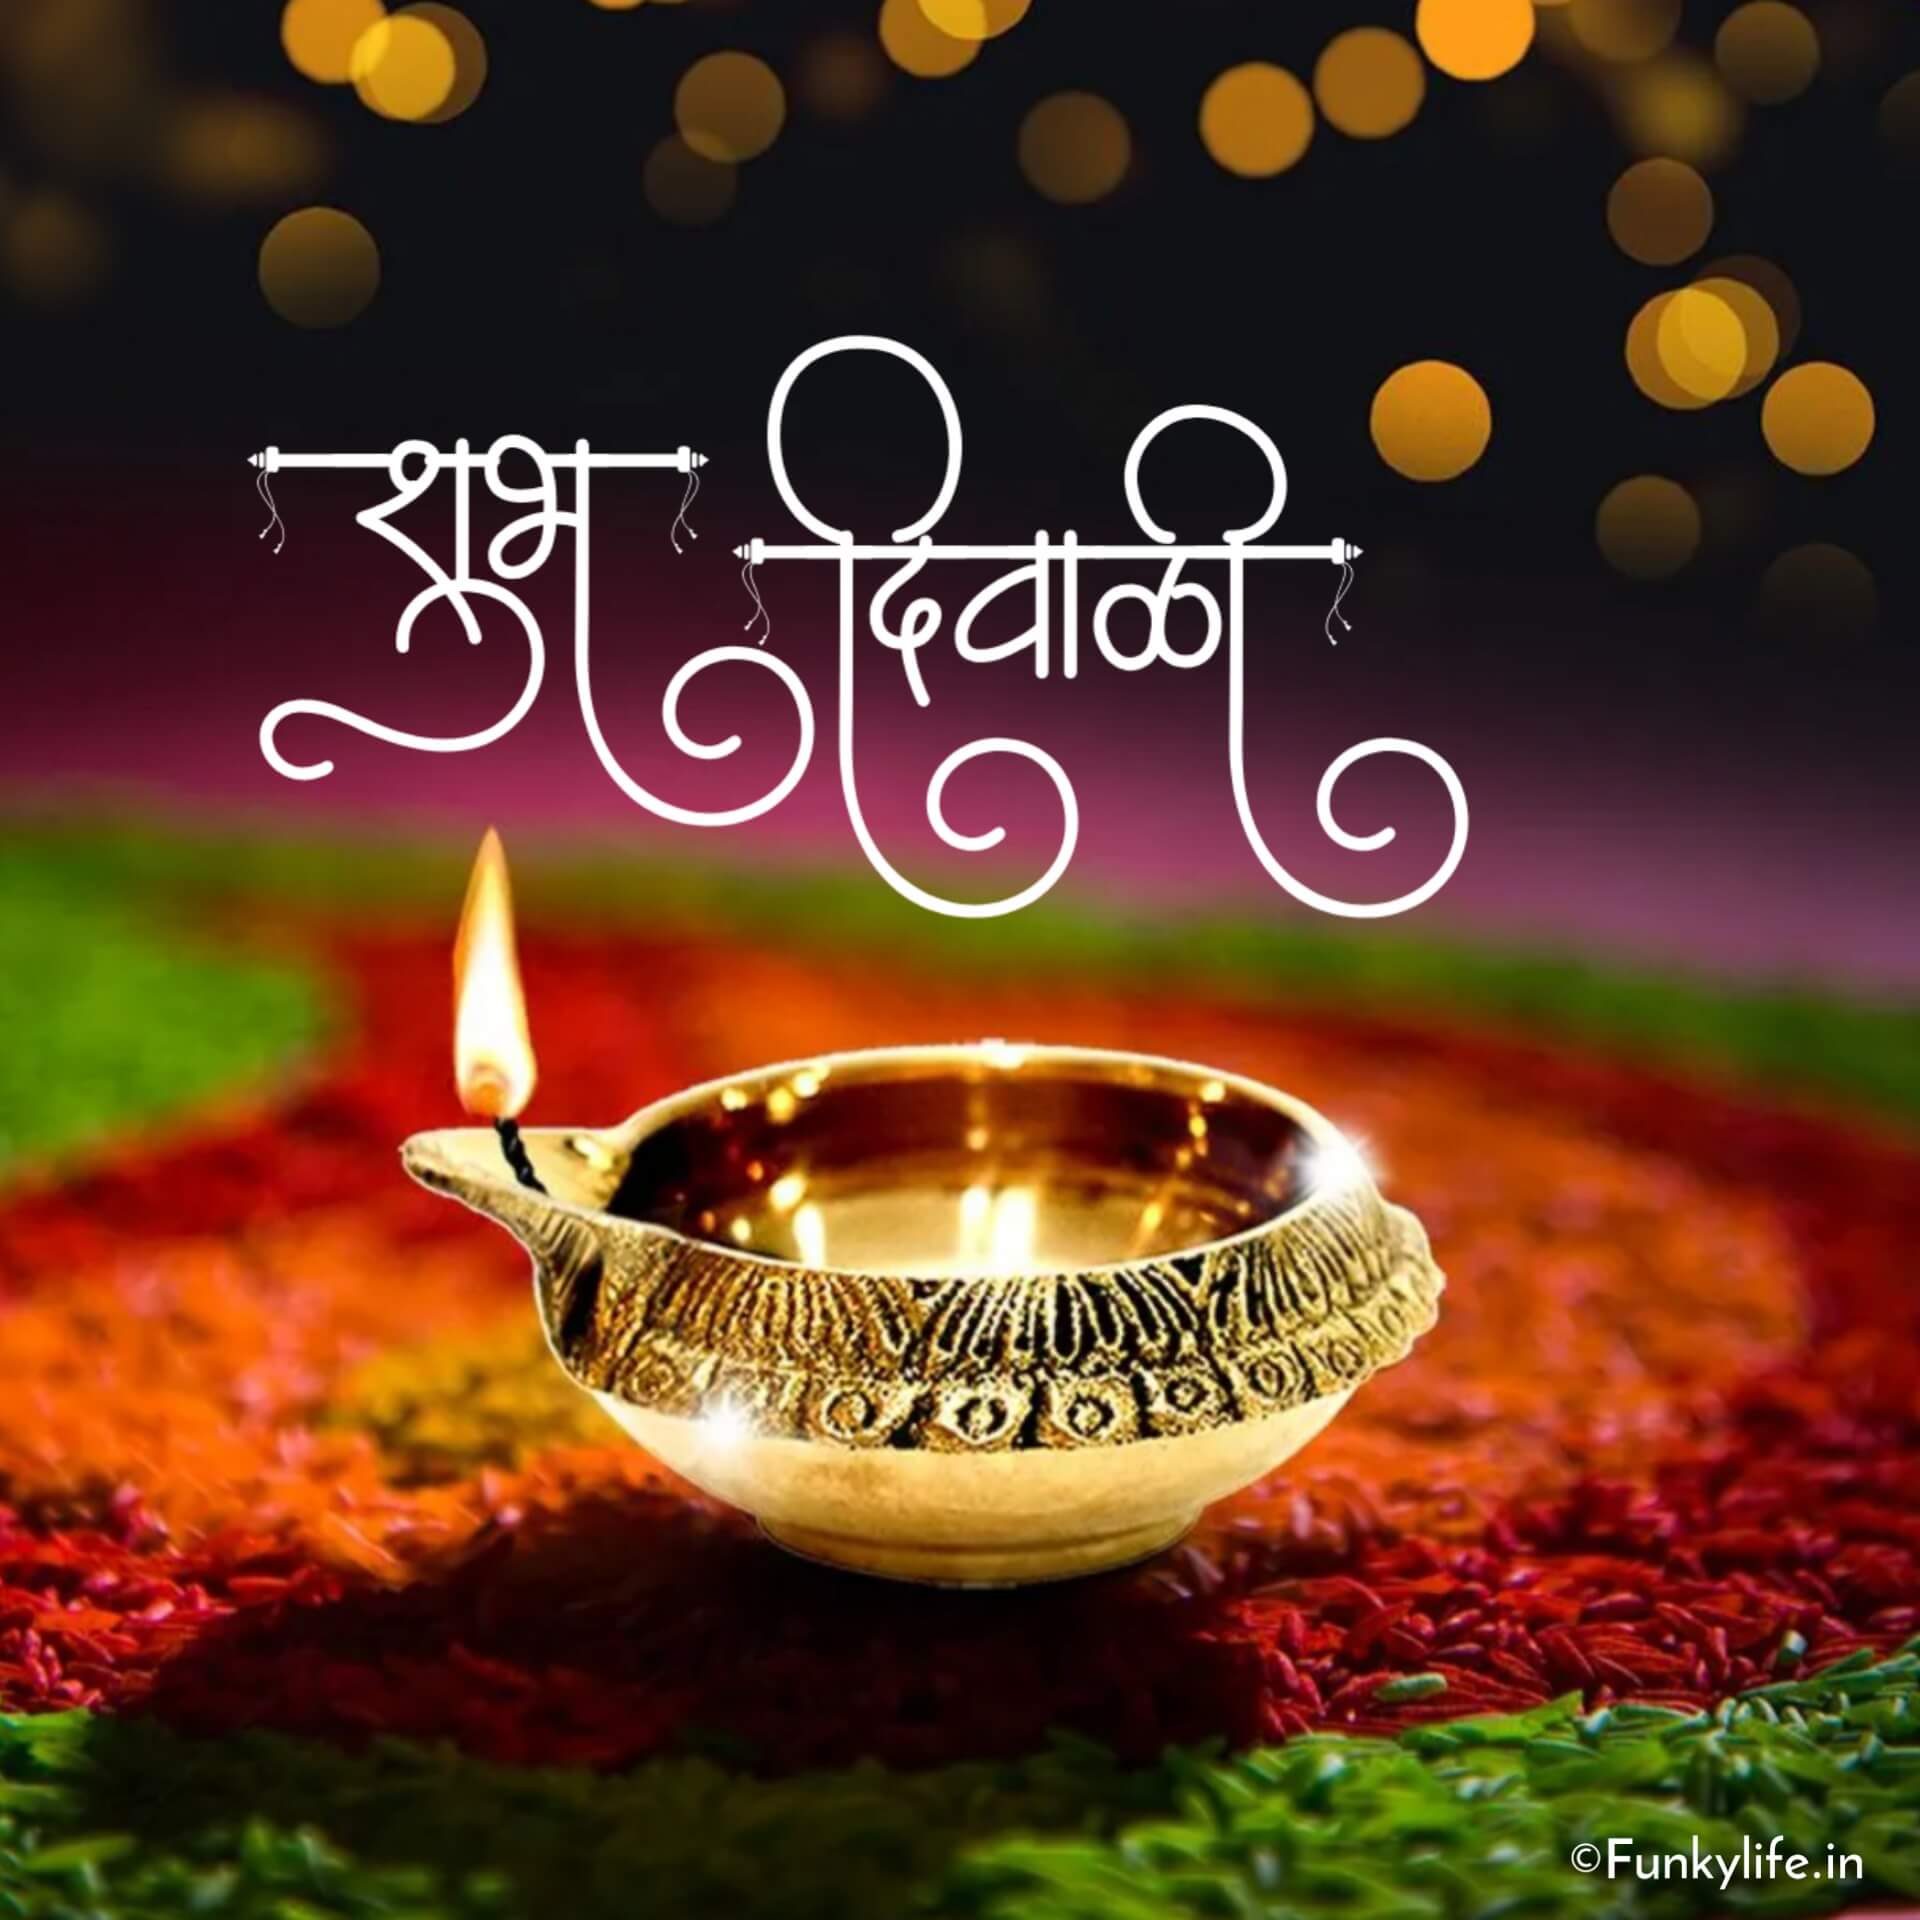 150+ BEST Diwali Images, Photos, Pictures & Wallpapers 2022